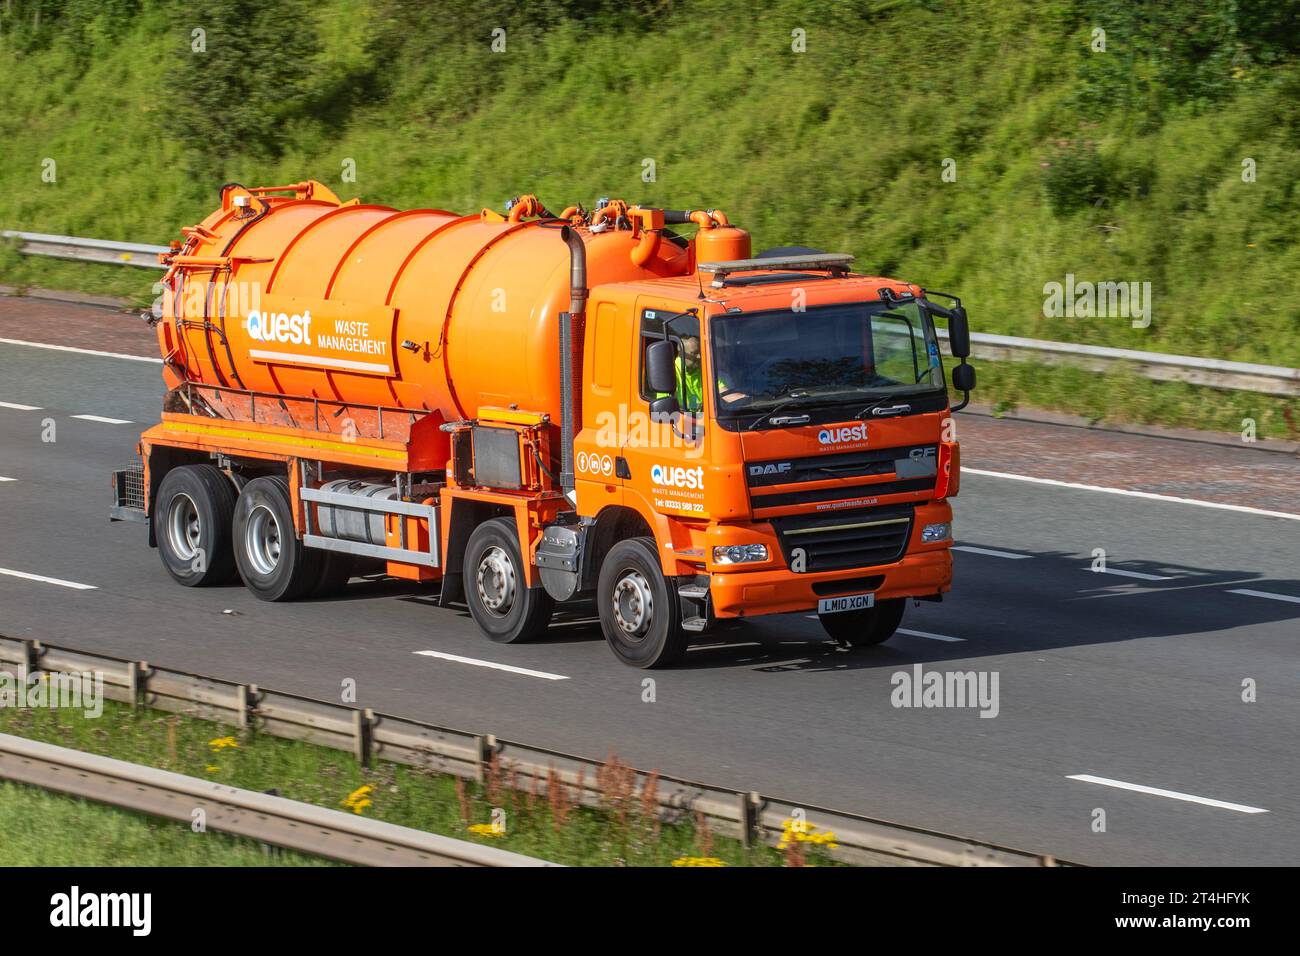 Quest Waste Management Ltd, Liquid Waste & Drainage Services Nationwide. Blocked Drains, CCTV Surveys, Sewer Cleaning, Emergency Drain Unblocking Drainage service in Osset, UK Stock Photo